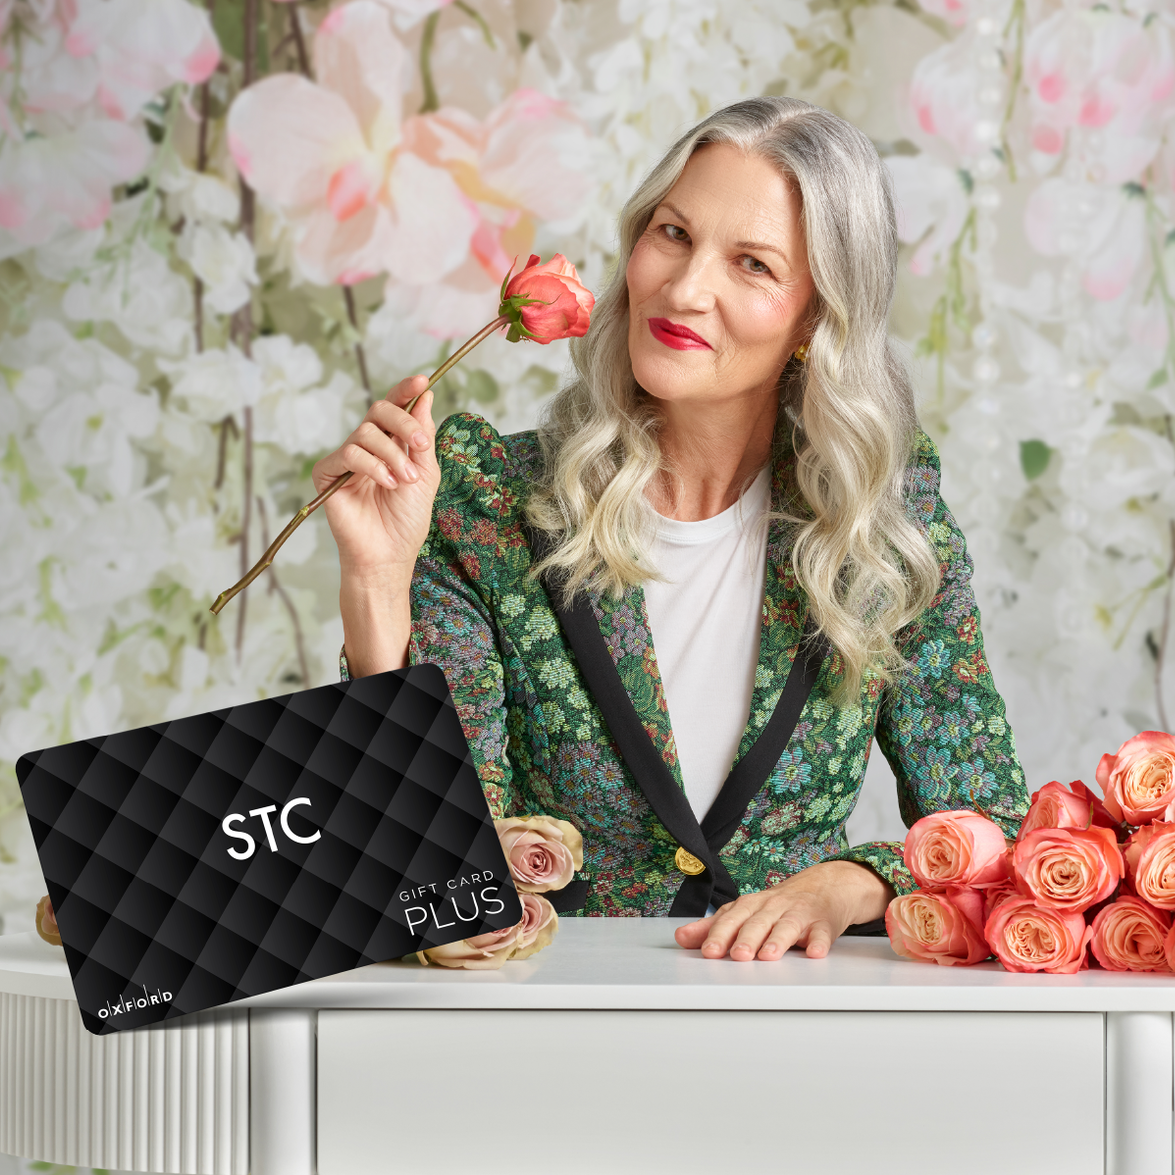 Woman holding roses posing with a gift card from STC